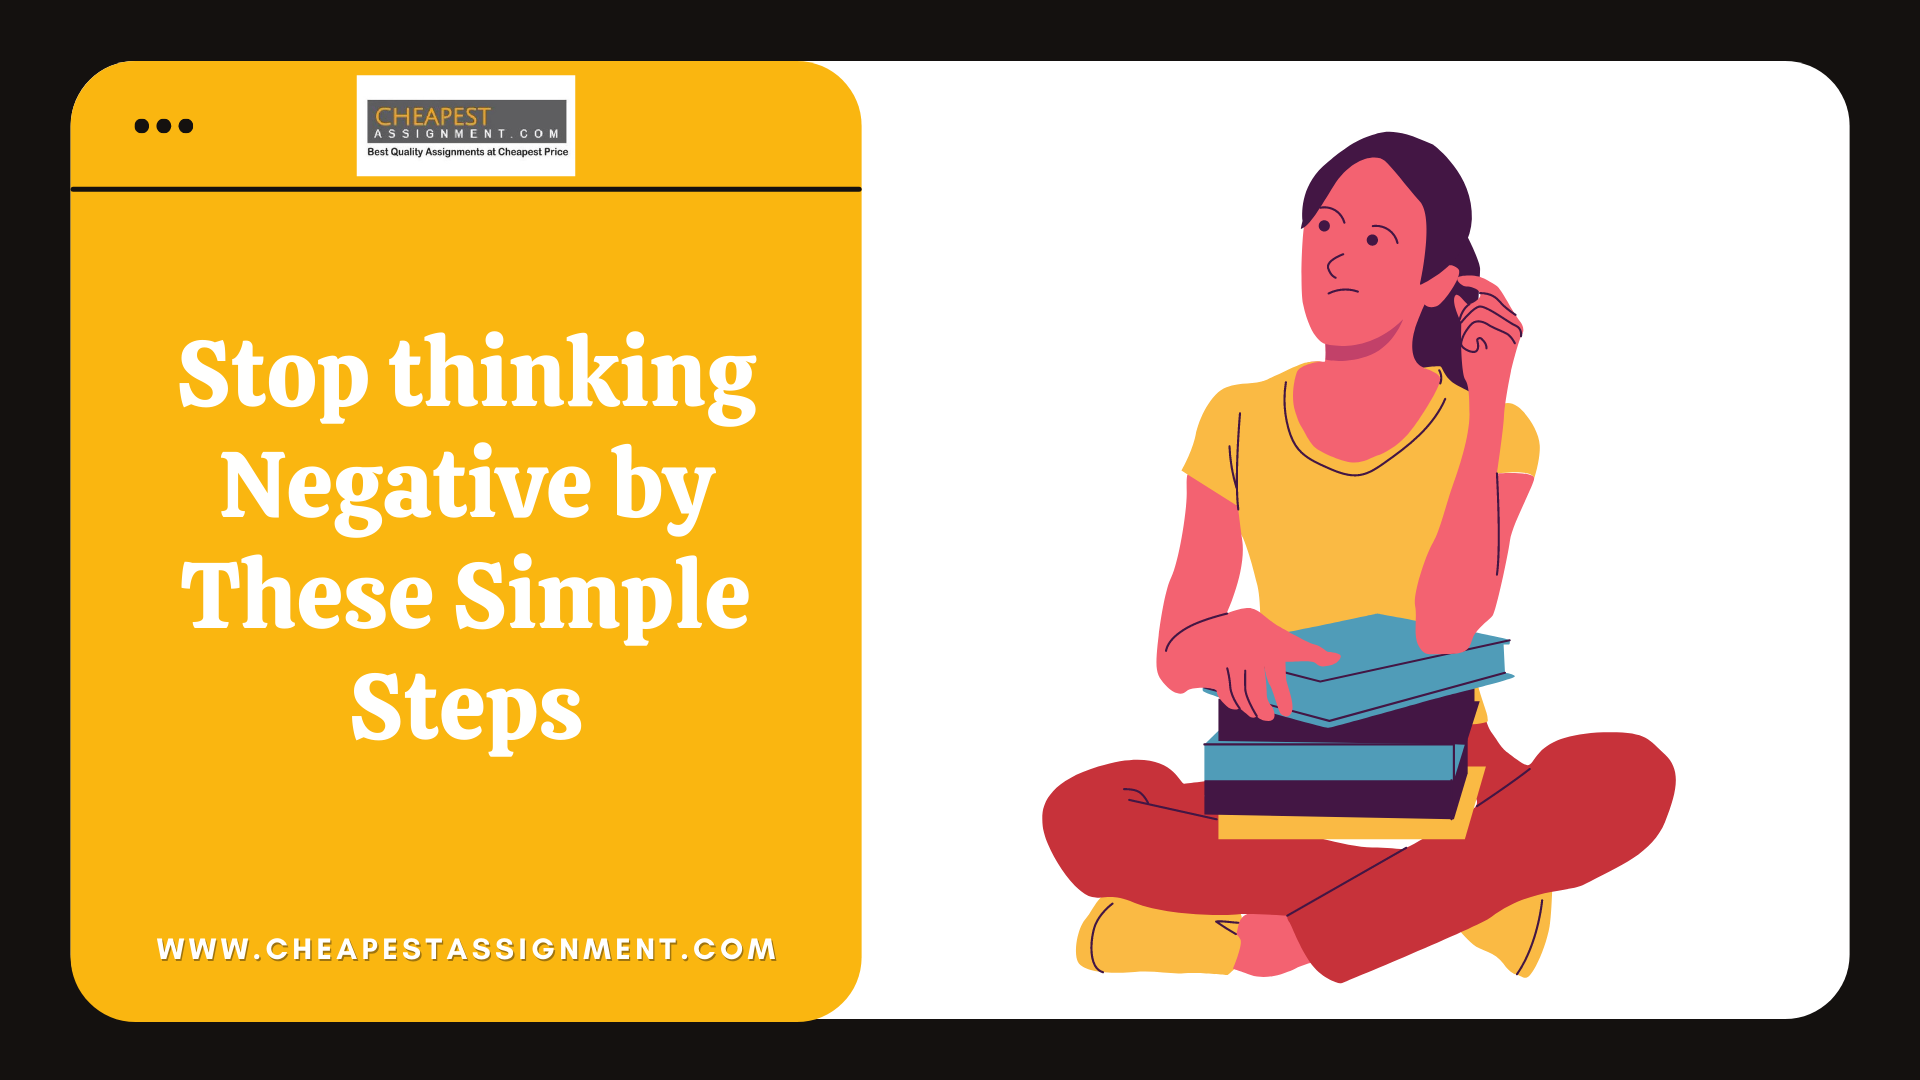 Stop thinking Negative by These Simple Steps